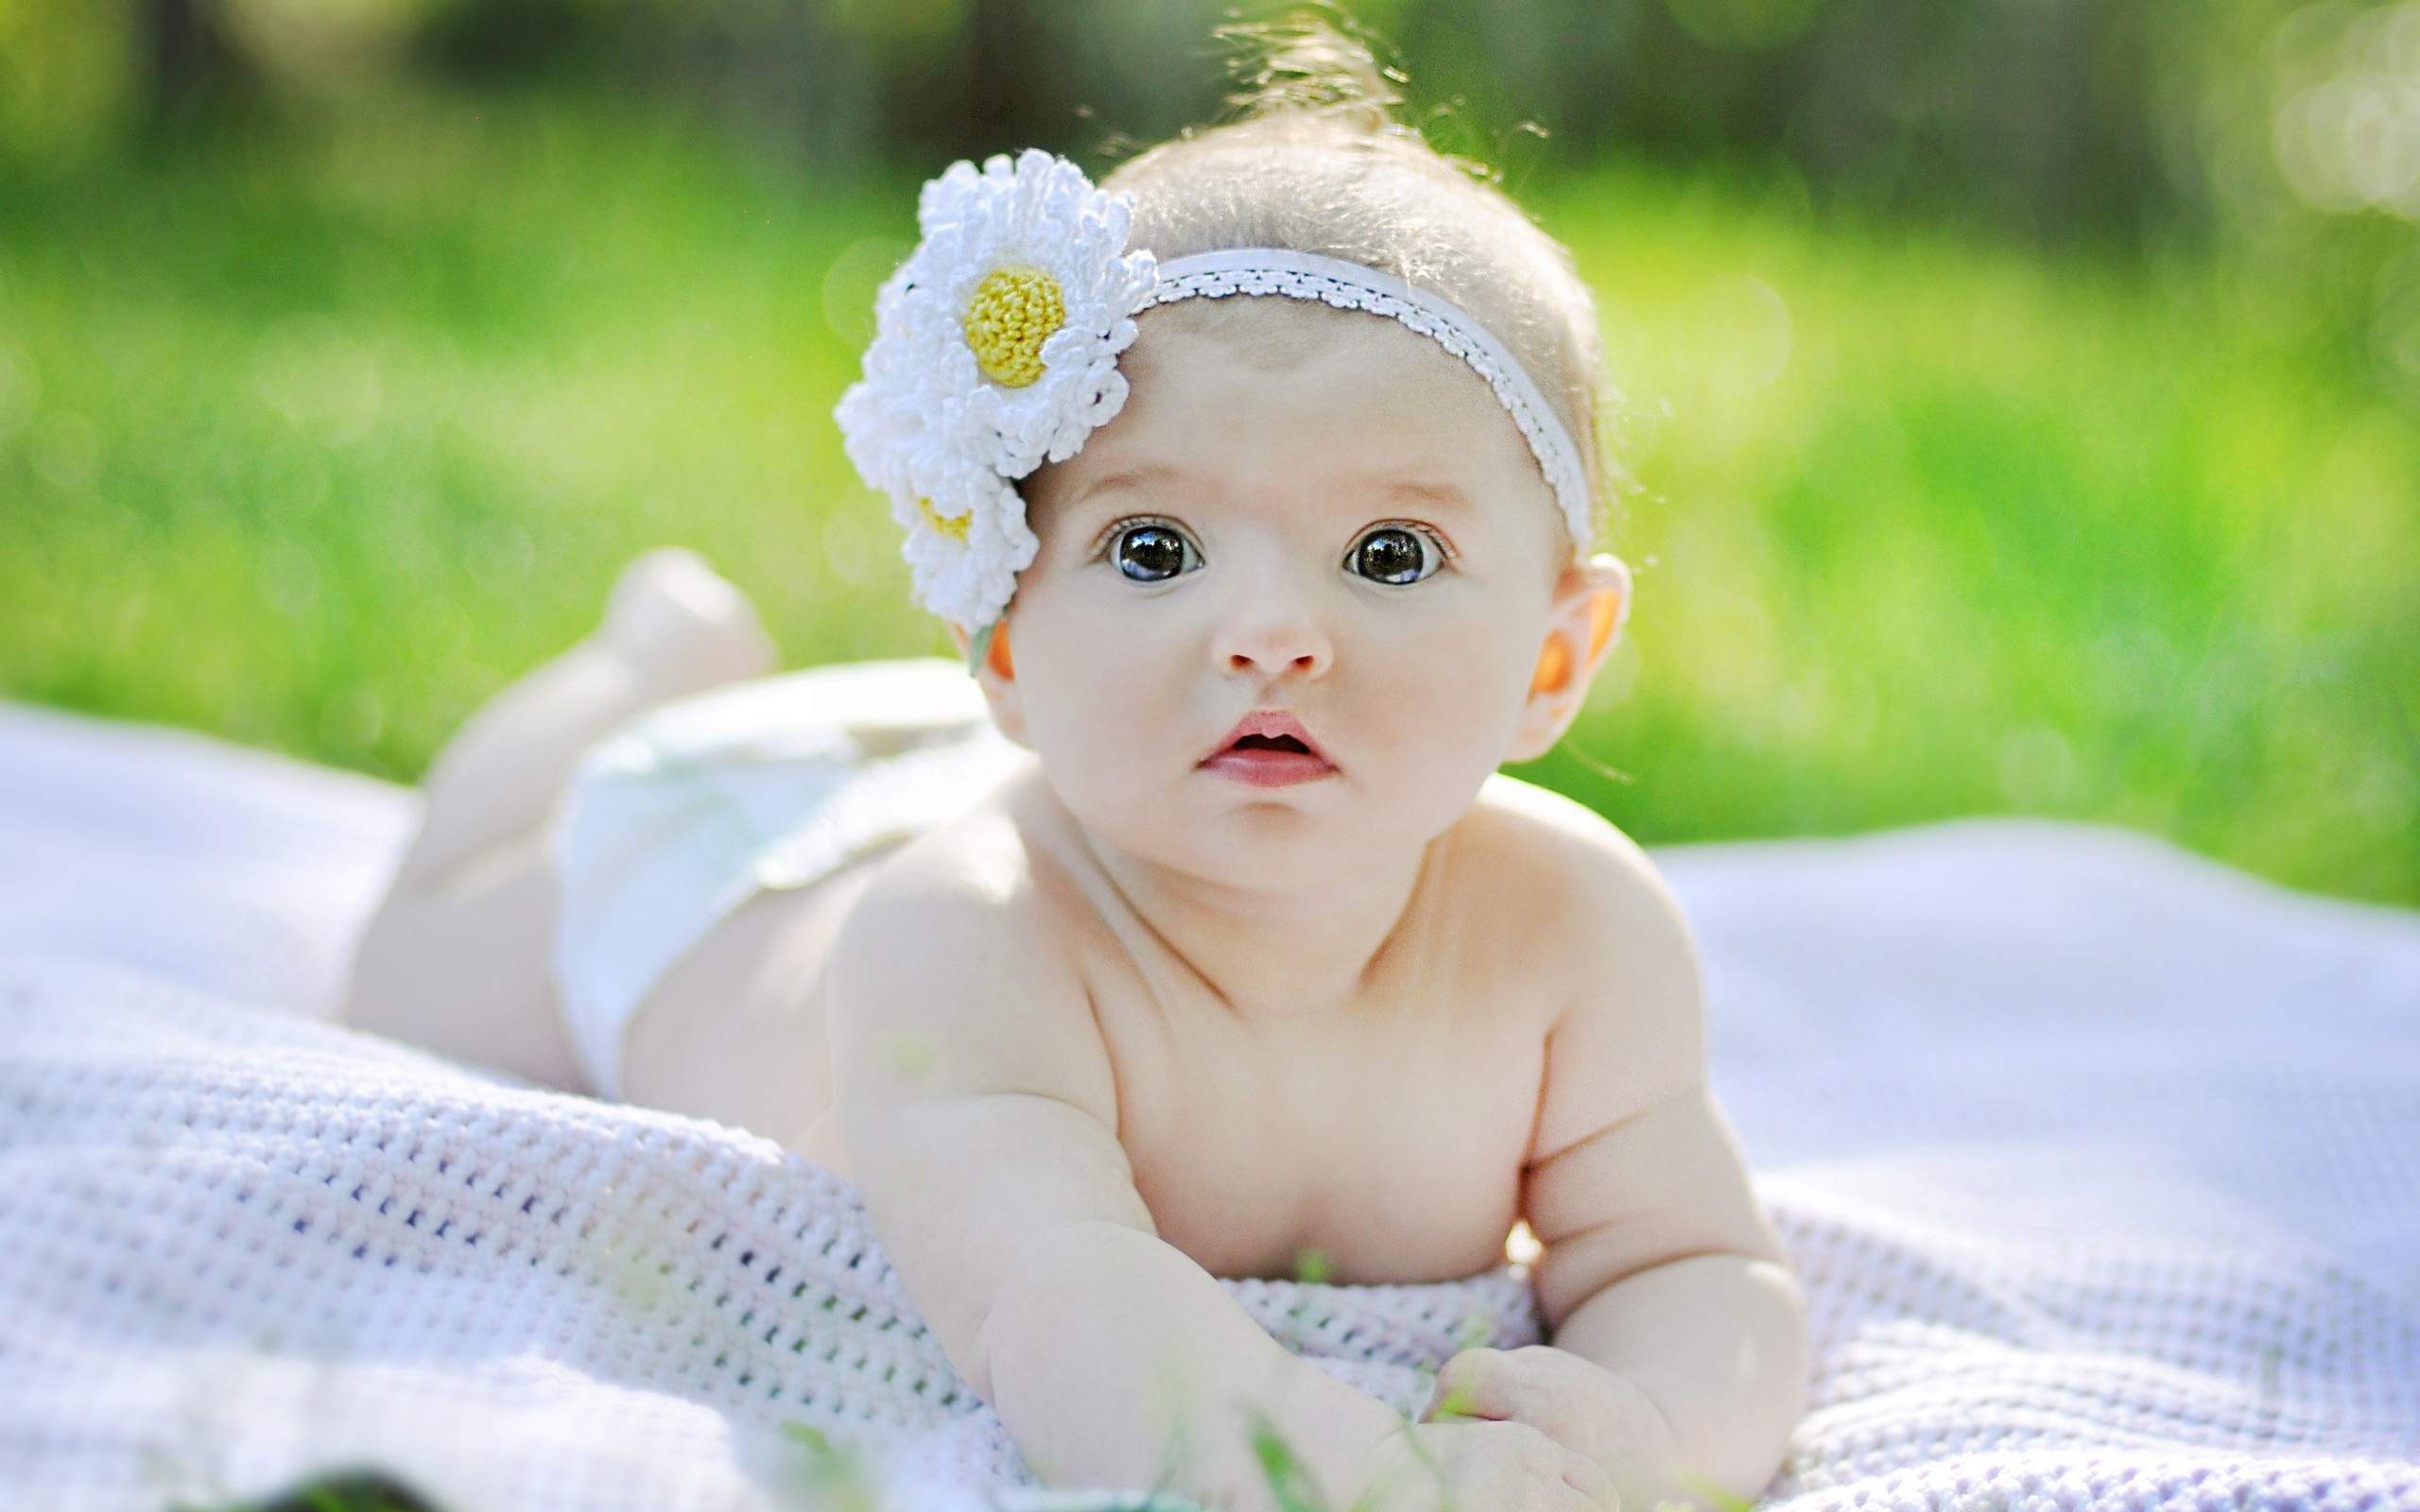 cute baby wallpaper,child,photograph,skin,baby,toddler